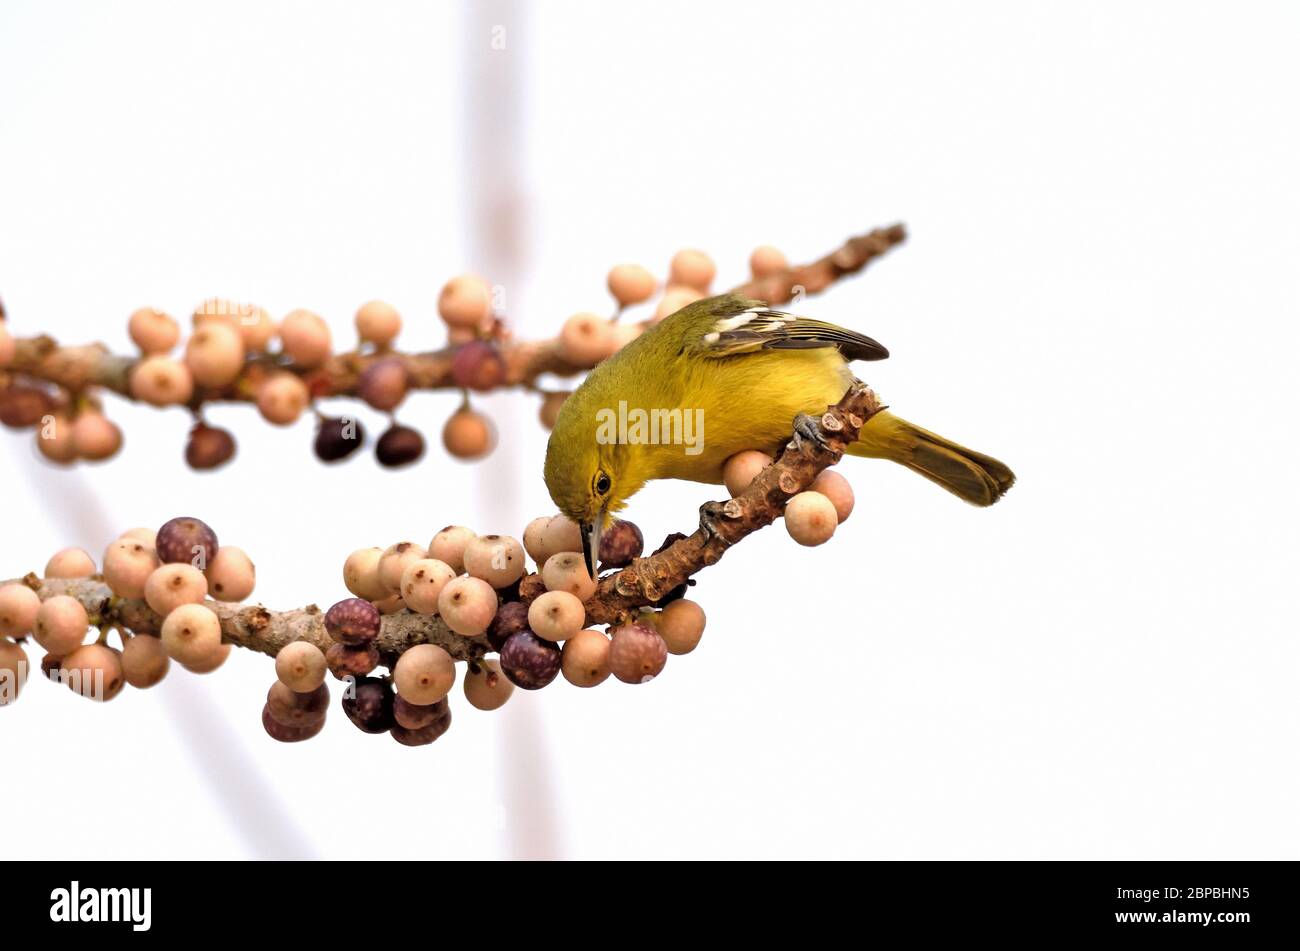 A female Common Iora (Aegithina tiphia) perched on a branch in a fruiting tree in Western Thailand Stock Photo